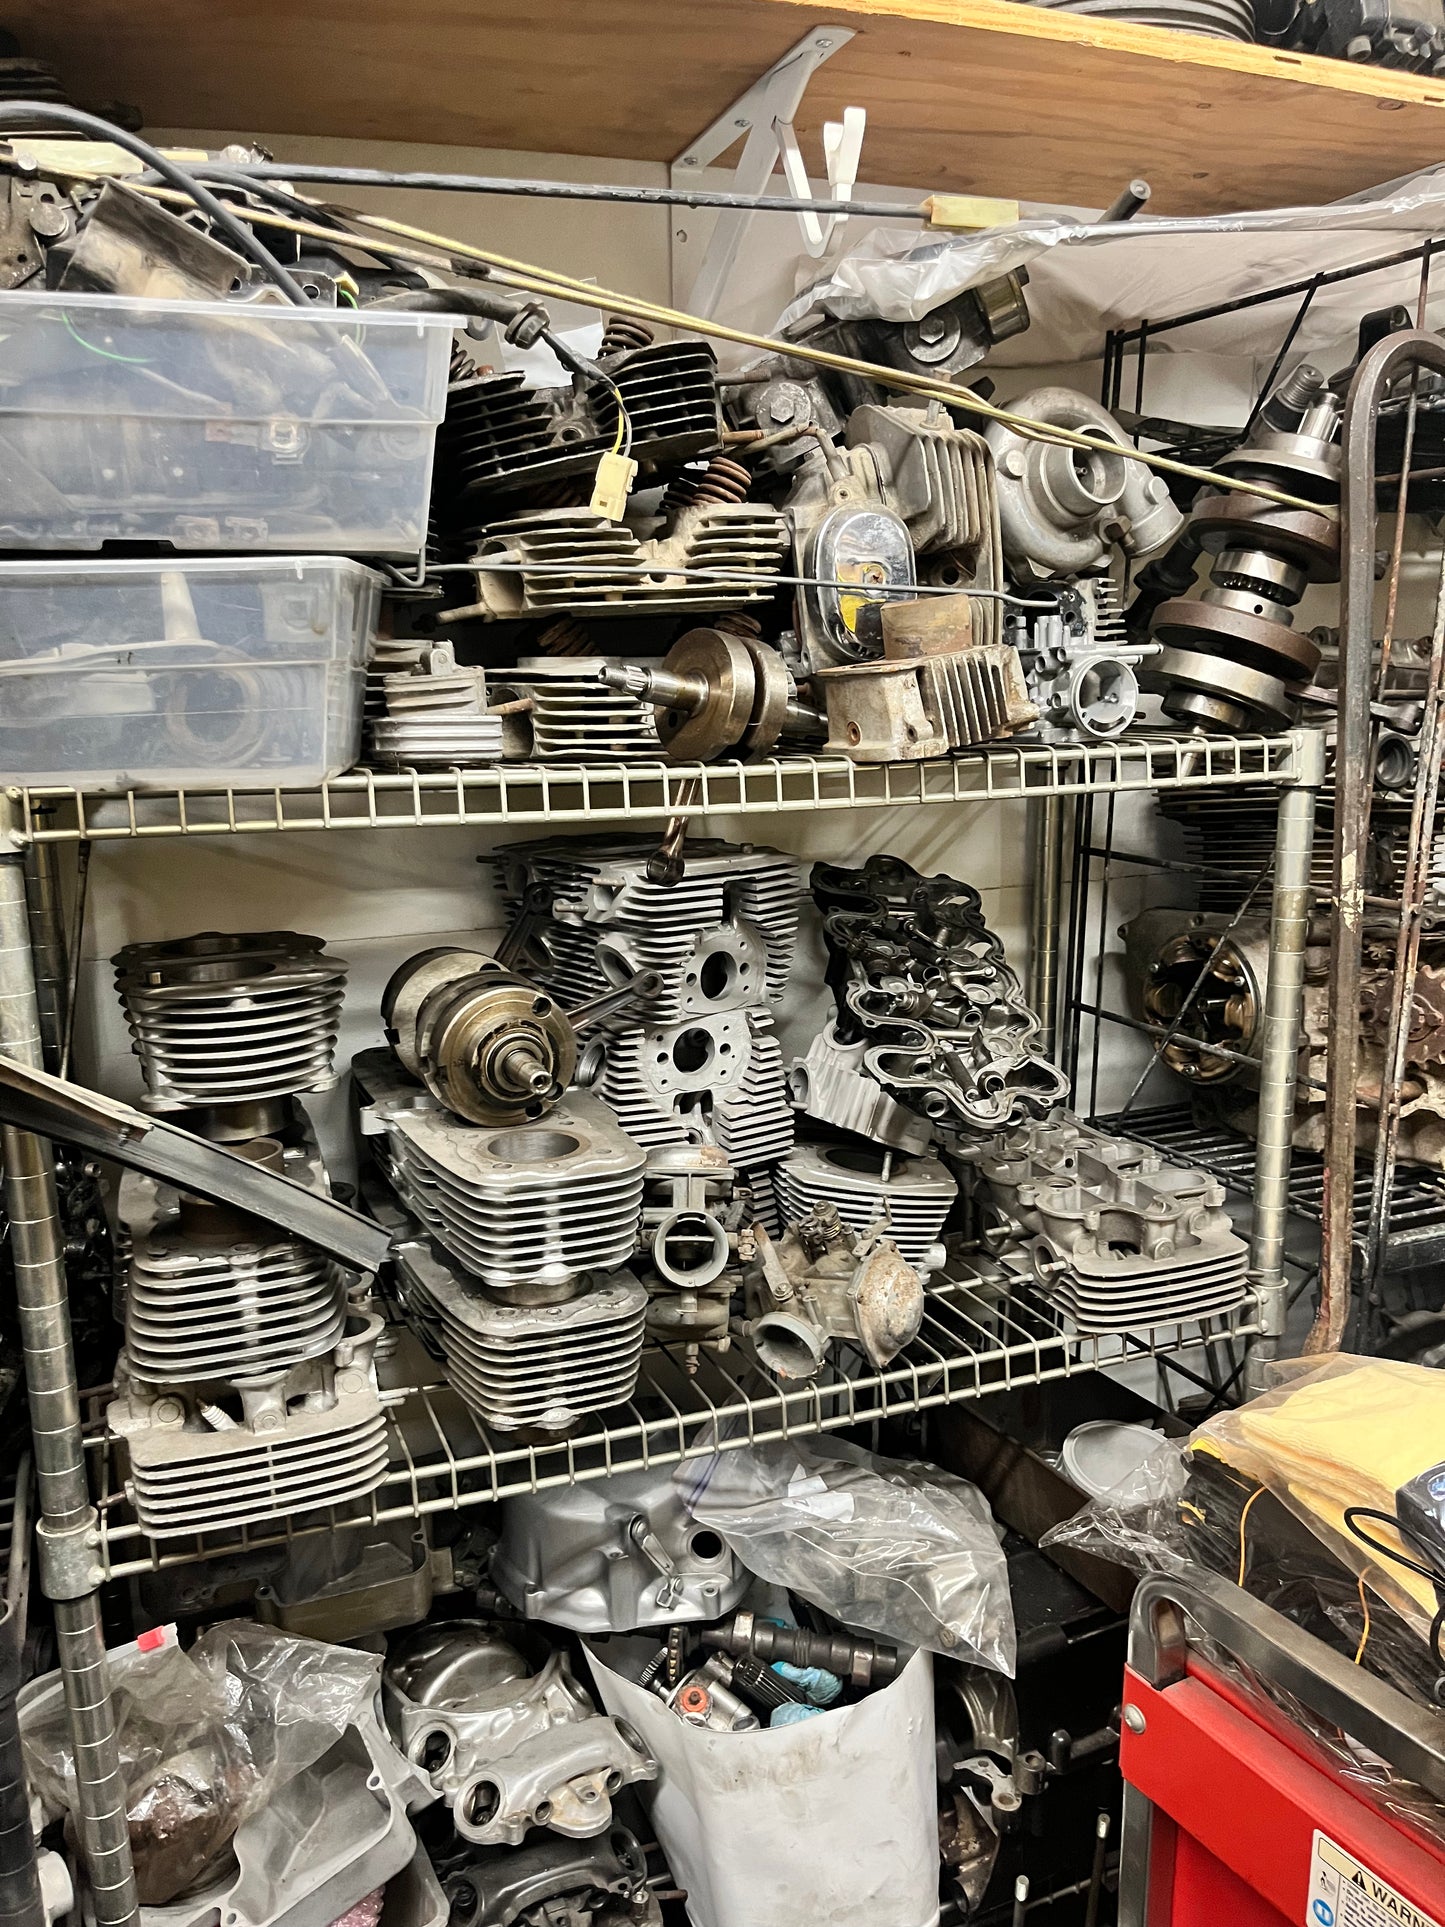 TONS OF BIKES and Parts